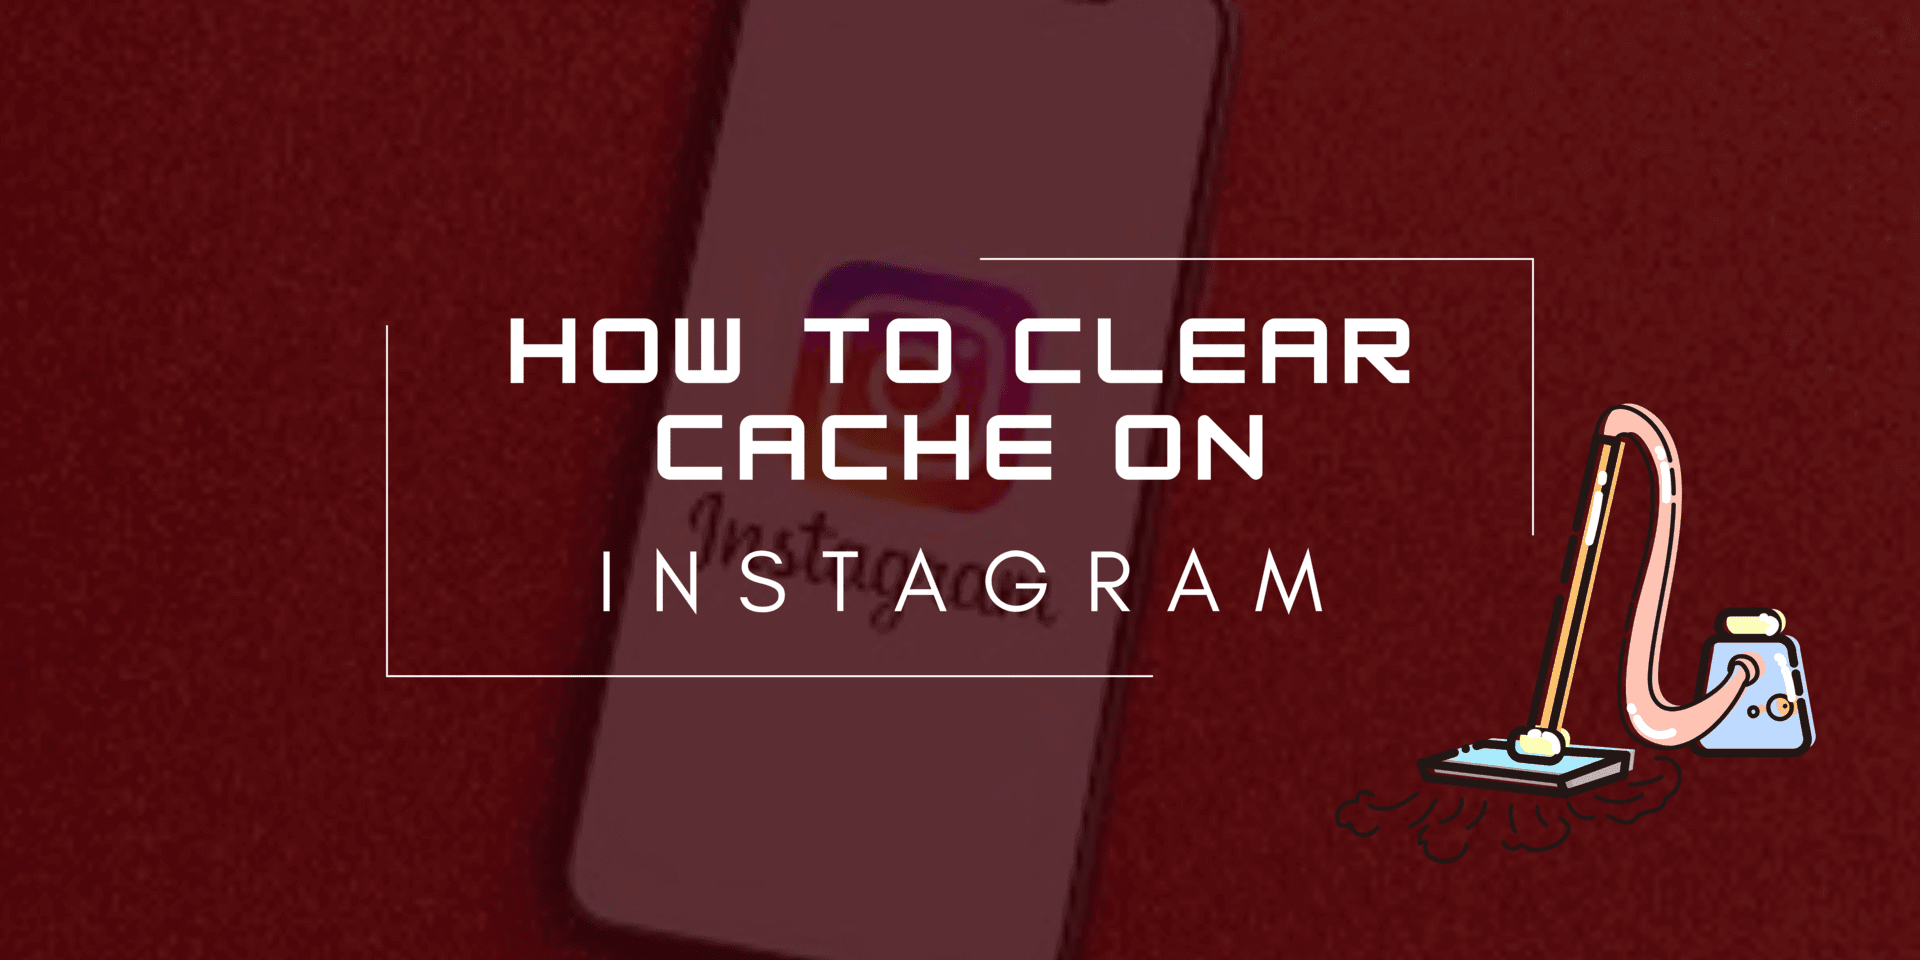 how to clear cache on Instagram